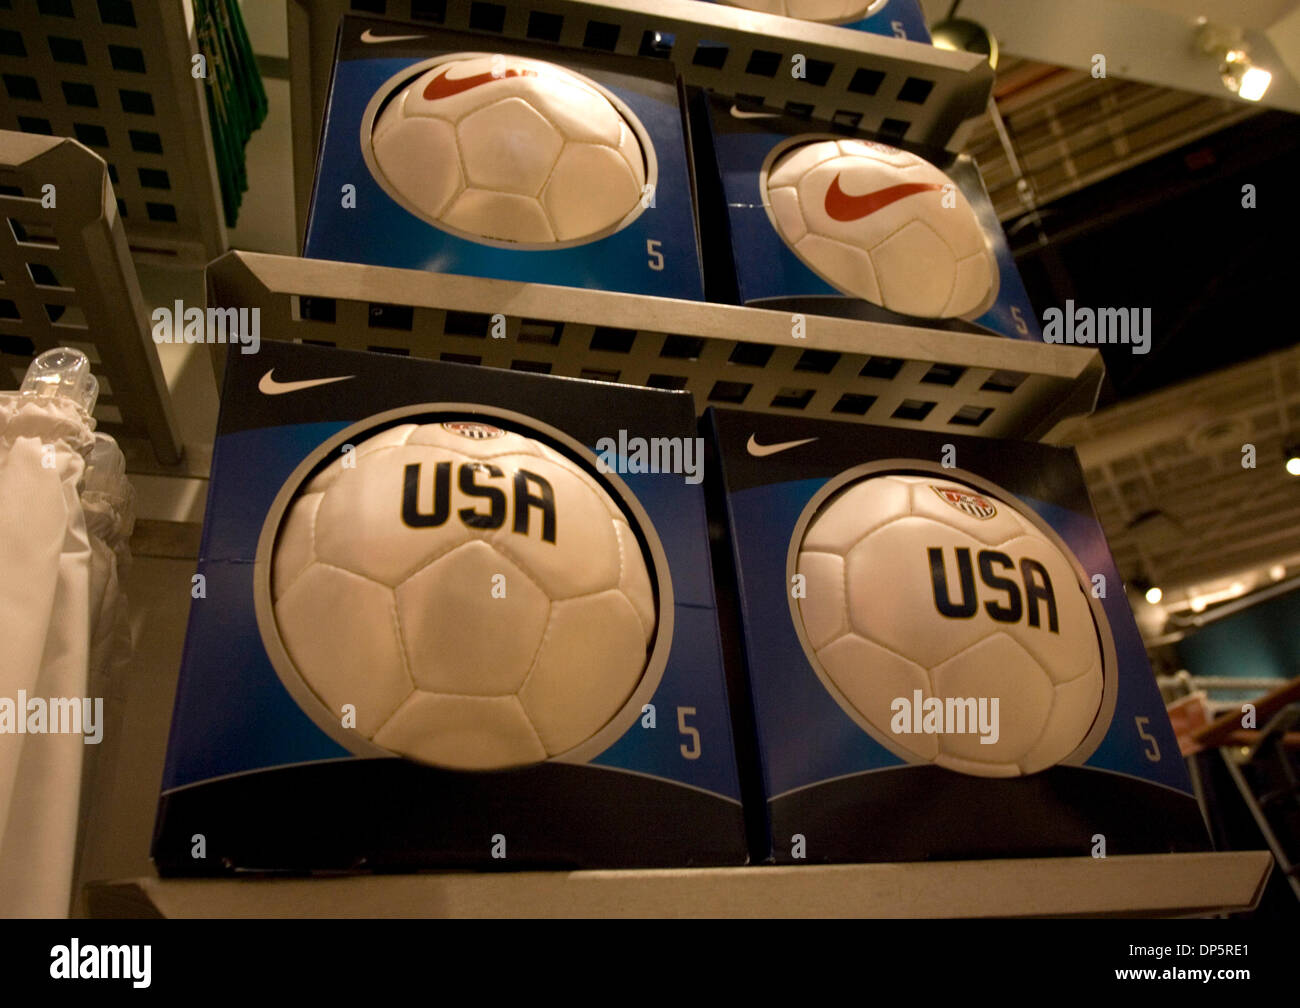 Sep 22, 2006; Portland, OR, USA; Nike logo adorned soccer balls are  displayed at the Niketown store in downtown Portland. Nike is a major  American manufacturer of athletic shoes, clothing and sports